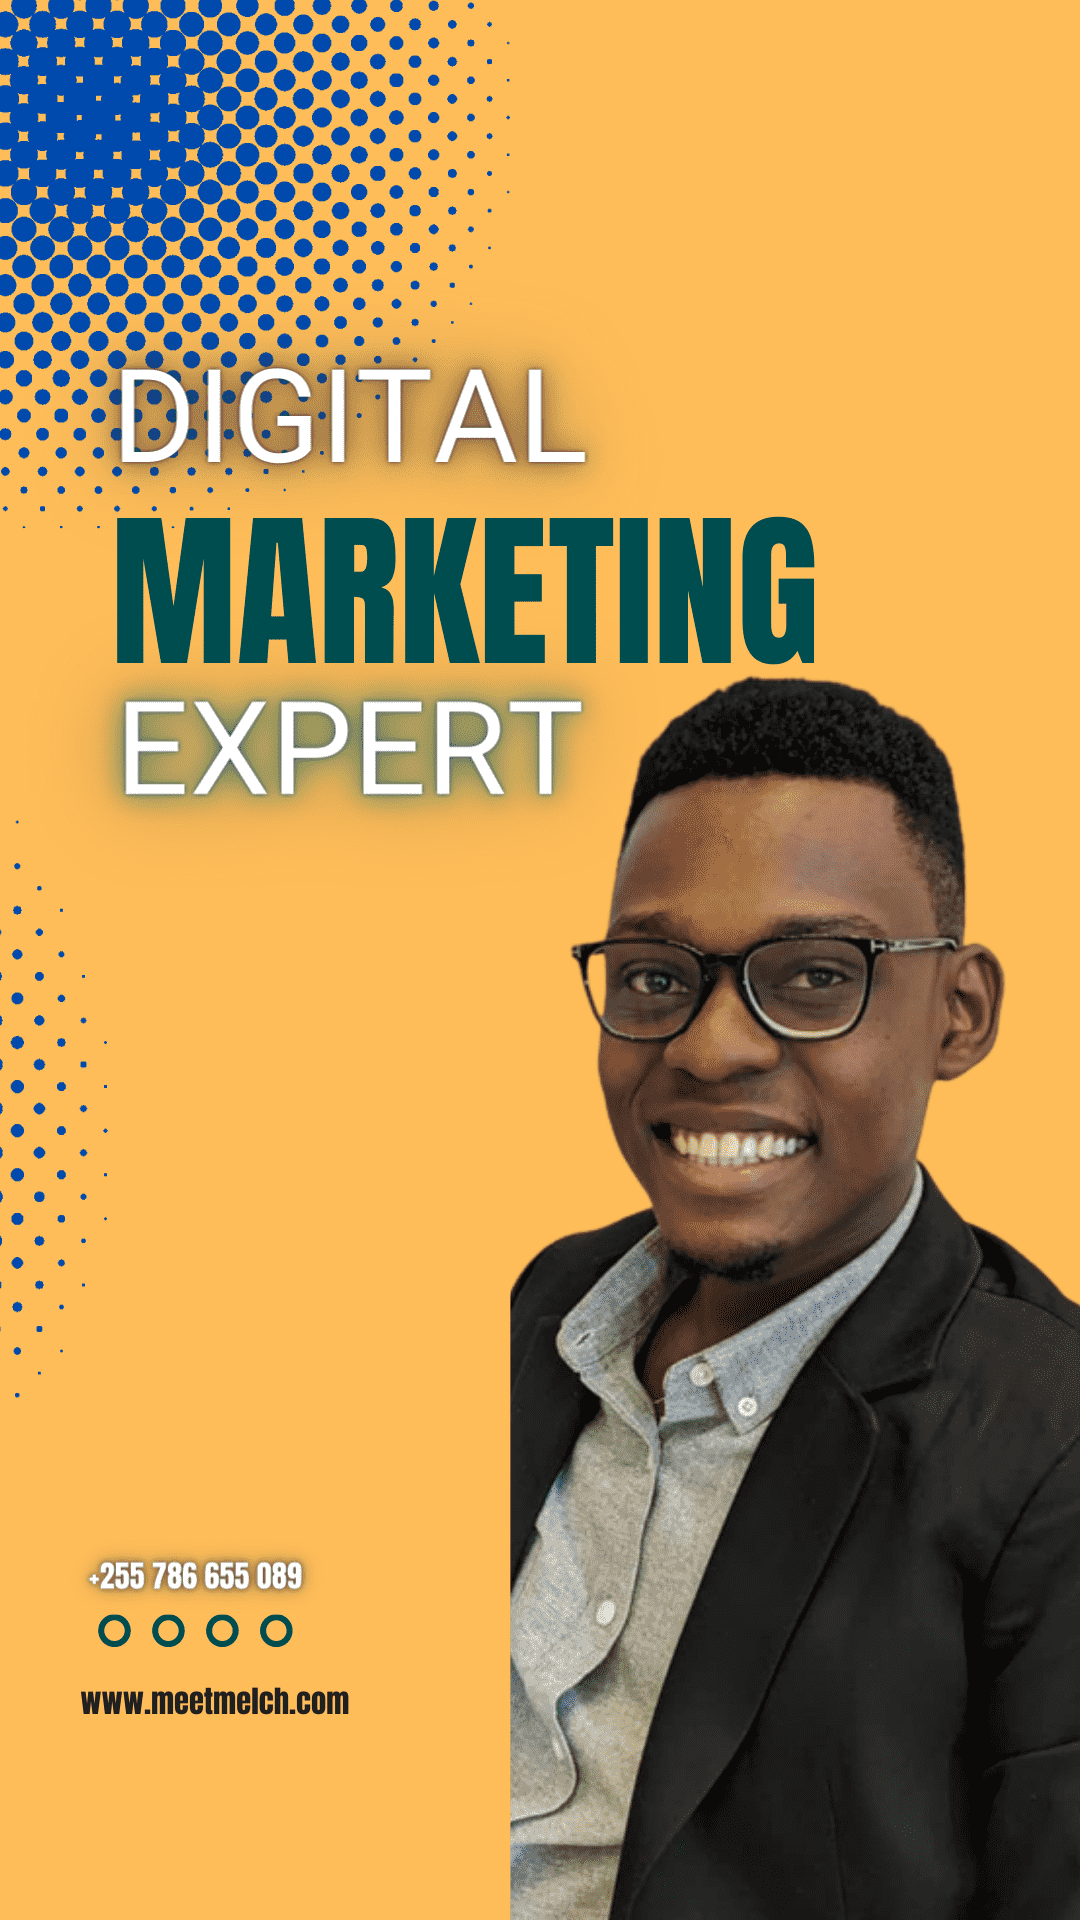 I will be your digital marketing expert